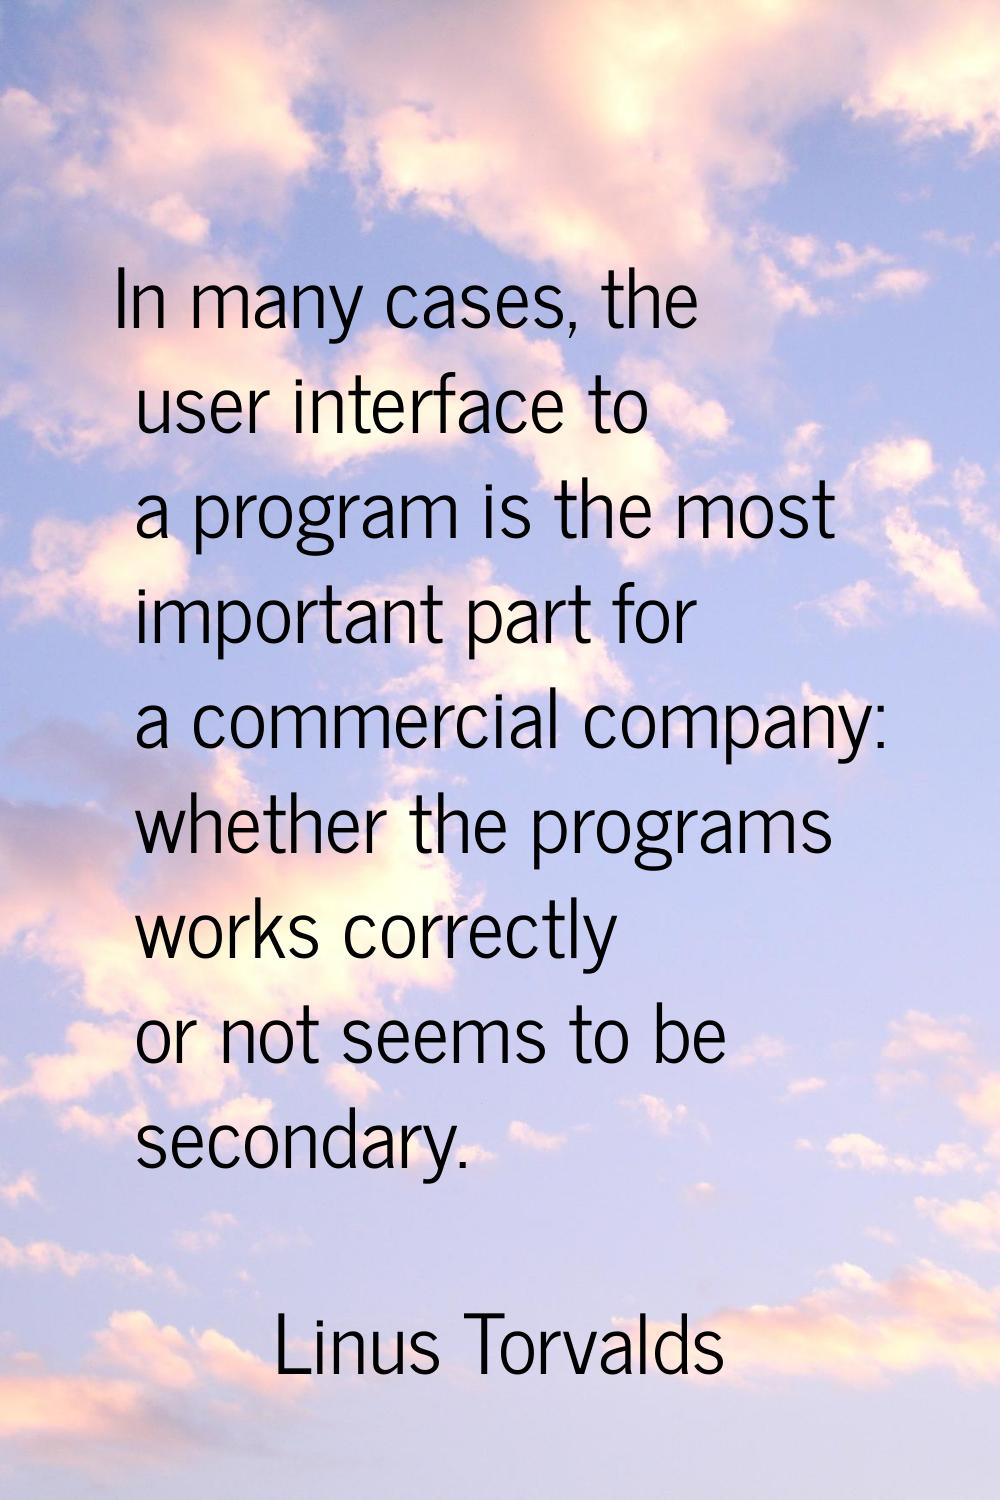 In many cases, the user interface to a program is the most important part for a commercial company: